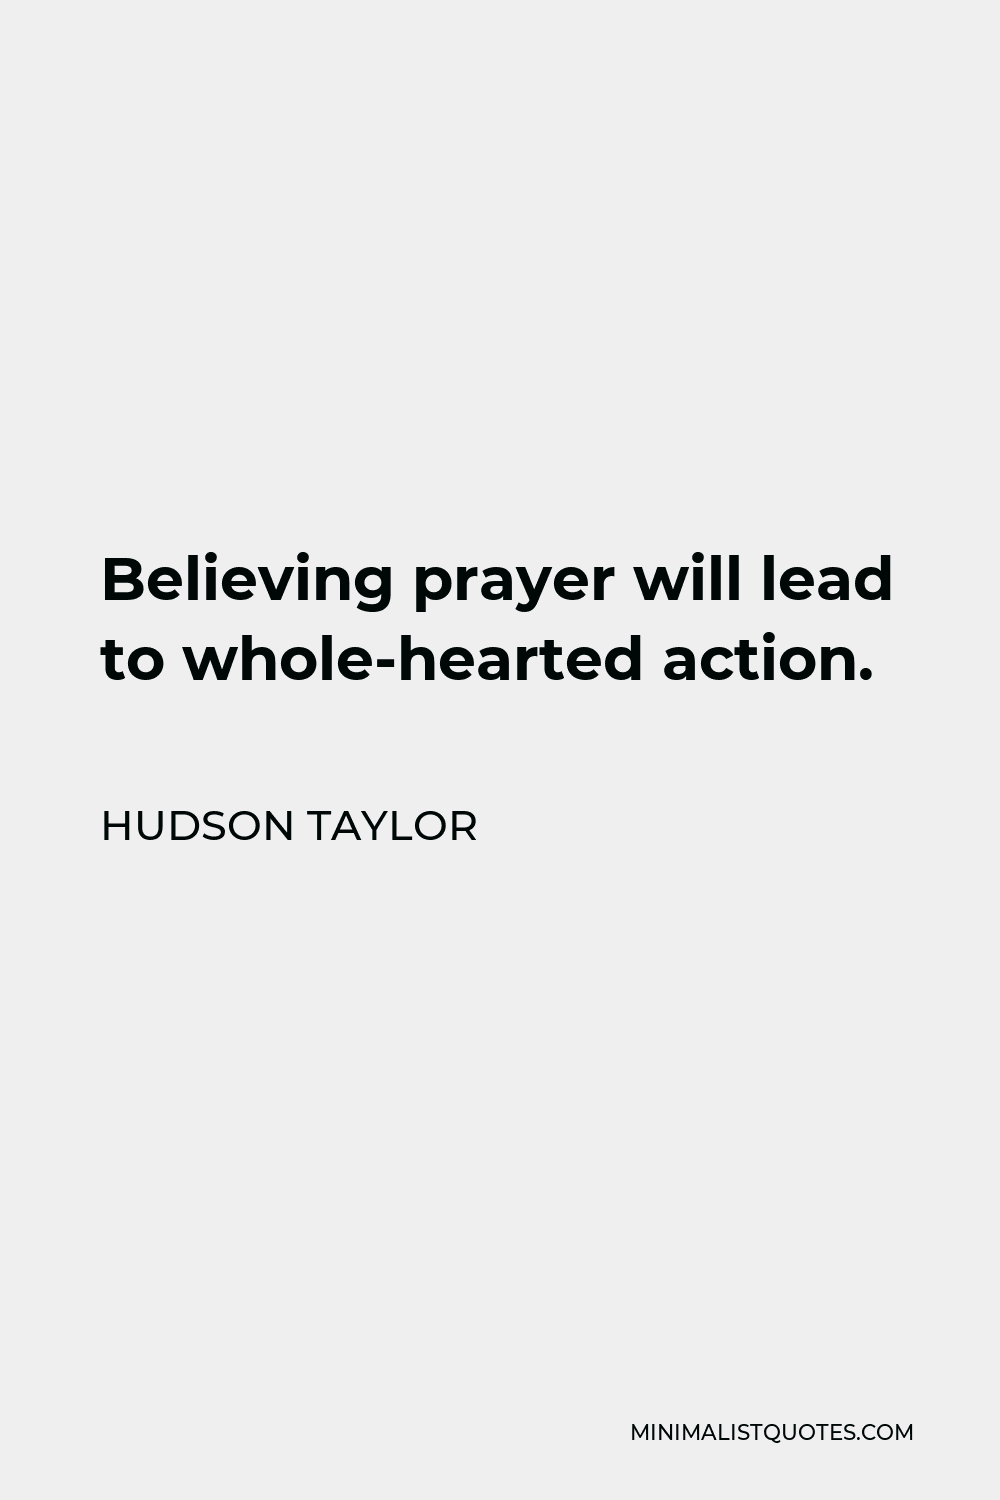 Hudson Taylor Quote - Believing prayer will lead to whole-hearted action.